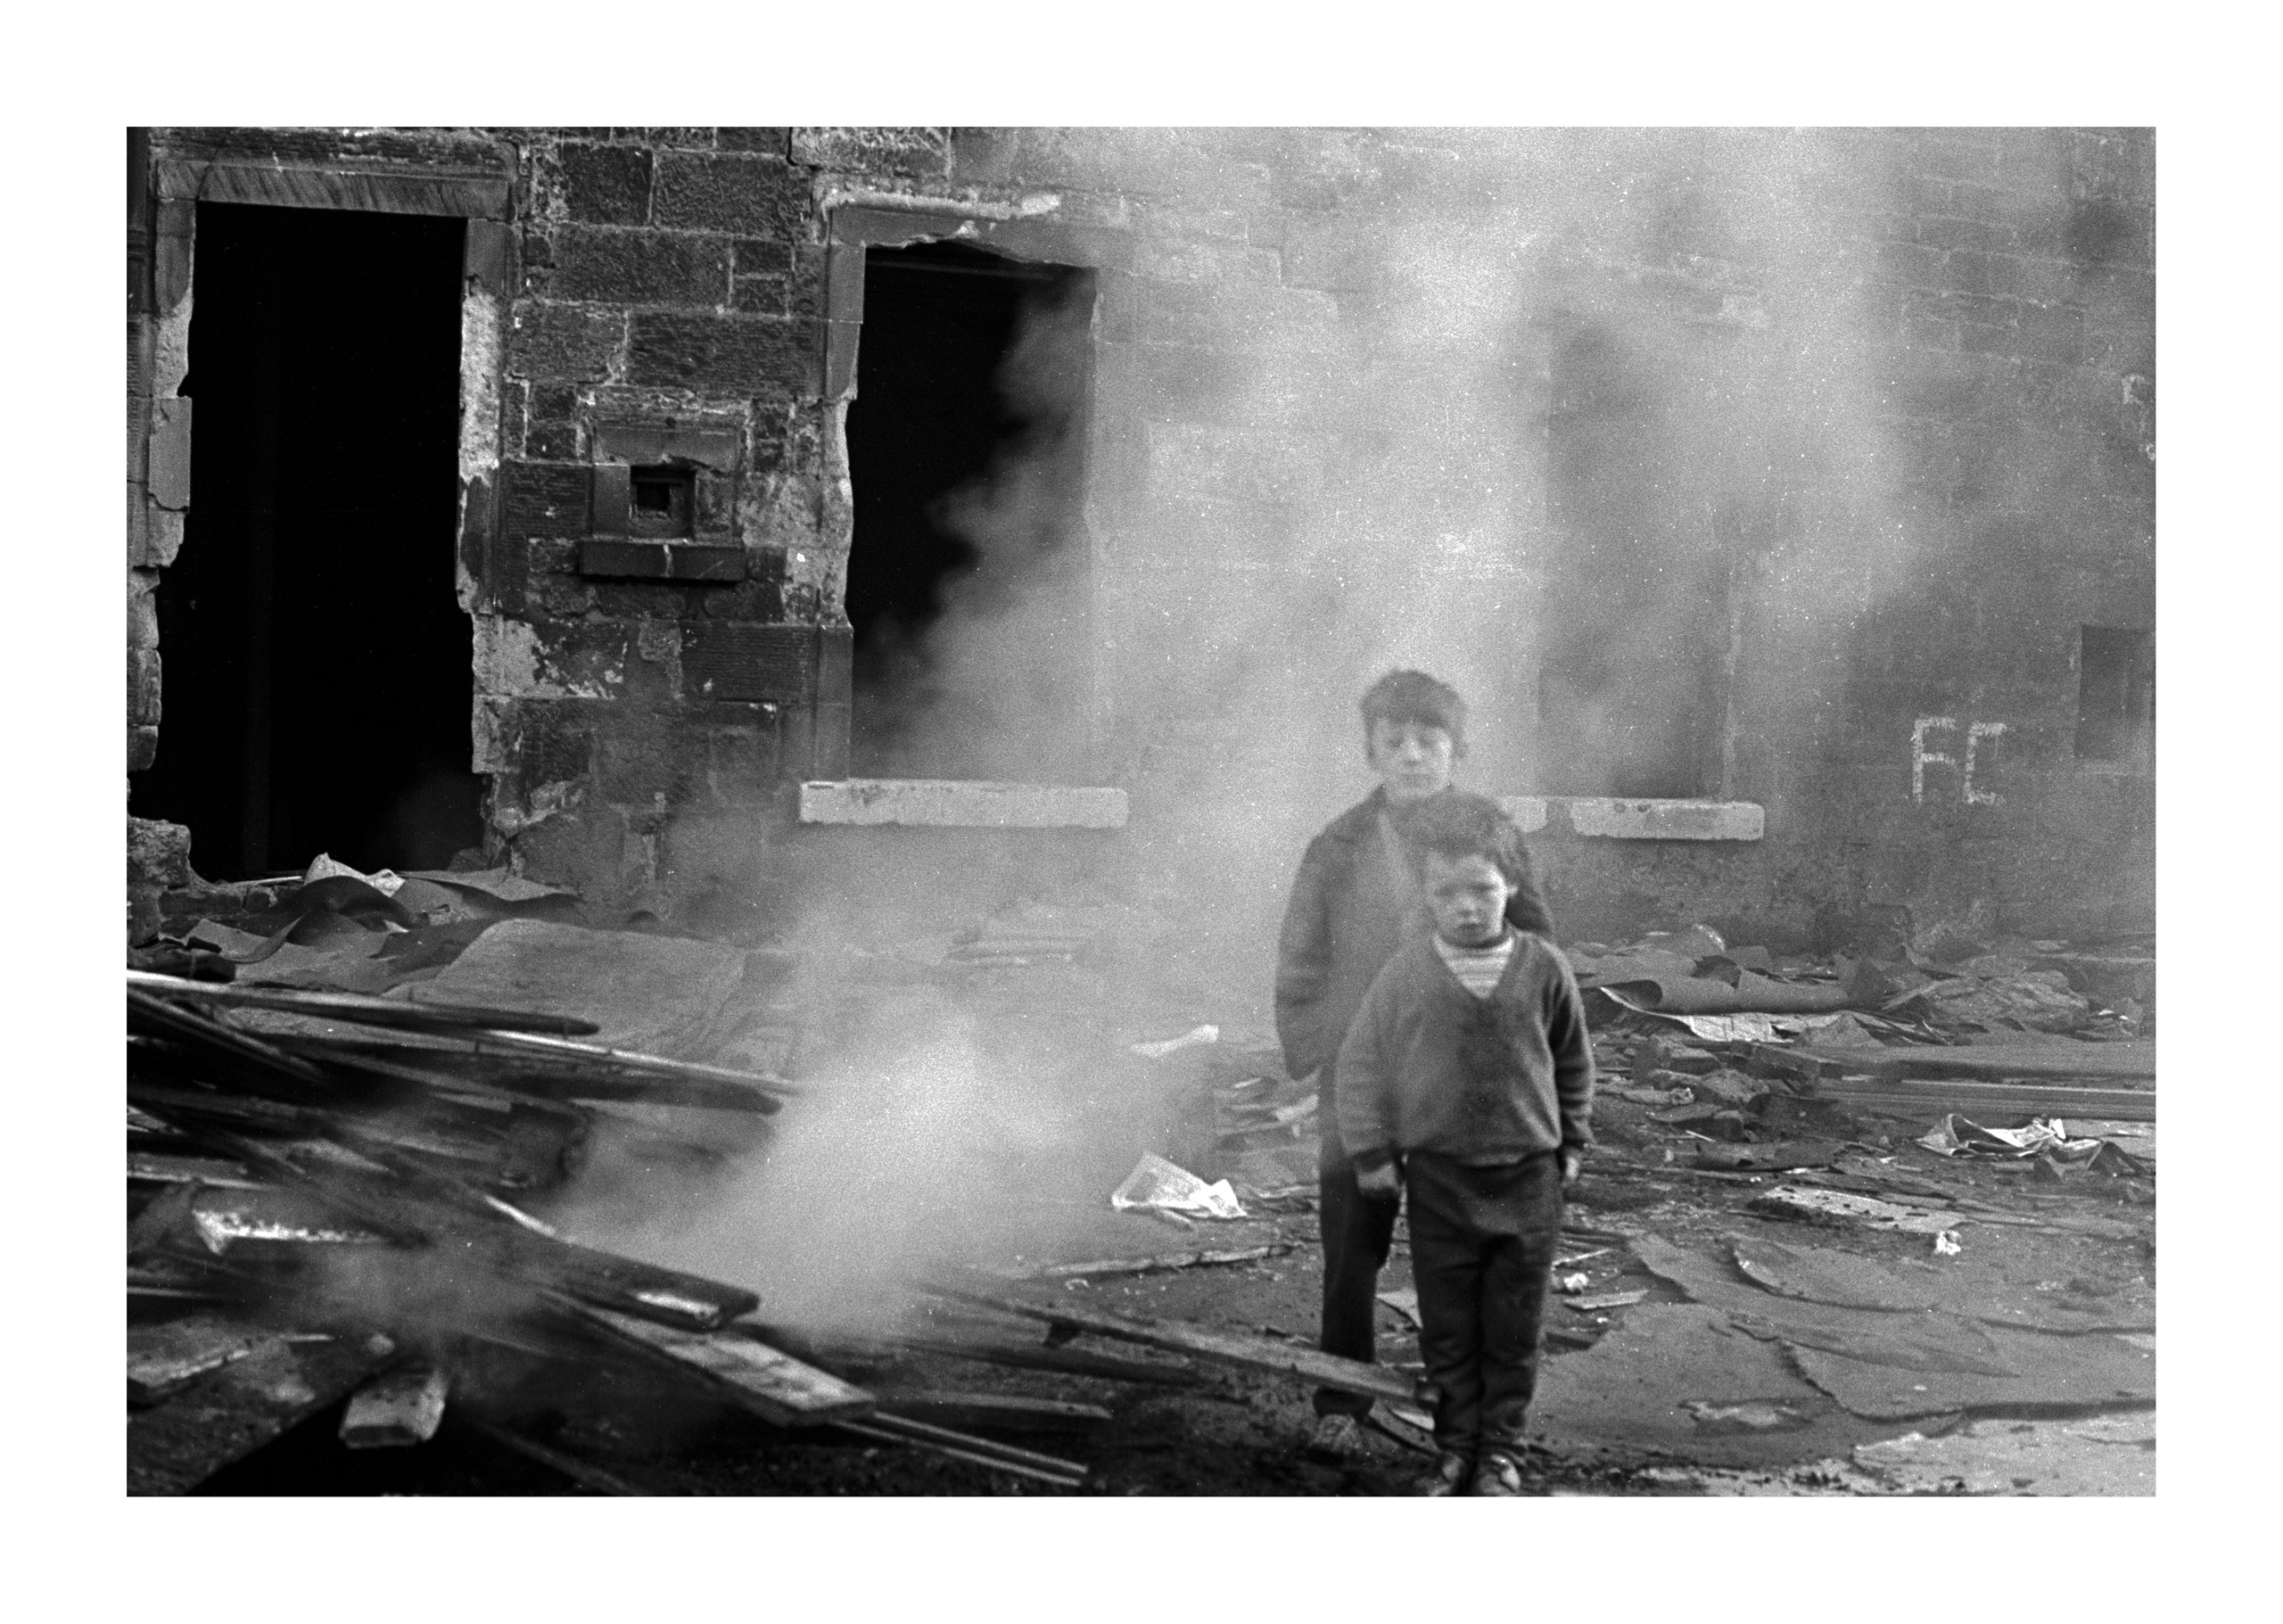 Image of  Untitled, from 'Glasgow 1974' (Two Young Boys in Smoke) by Hugh Hood